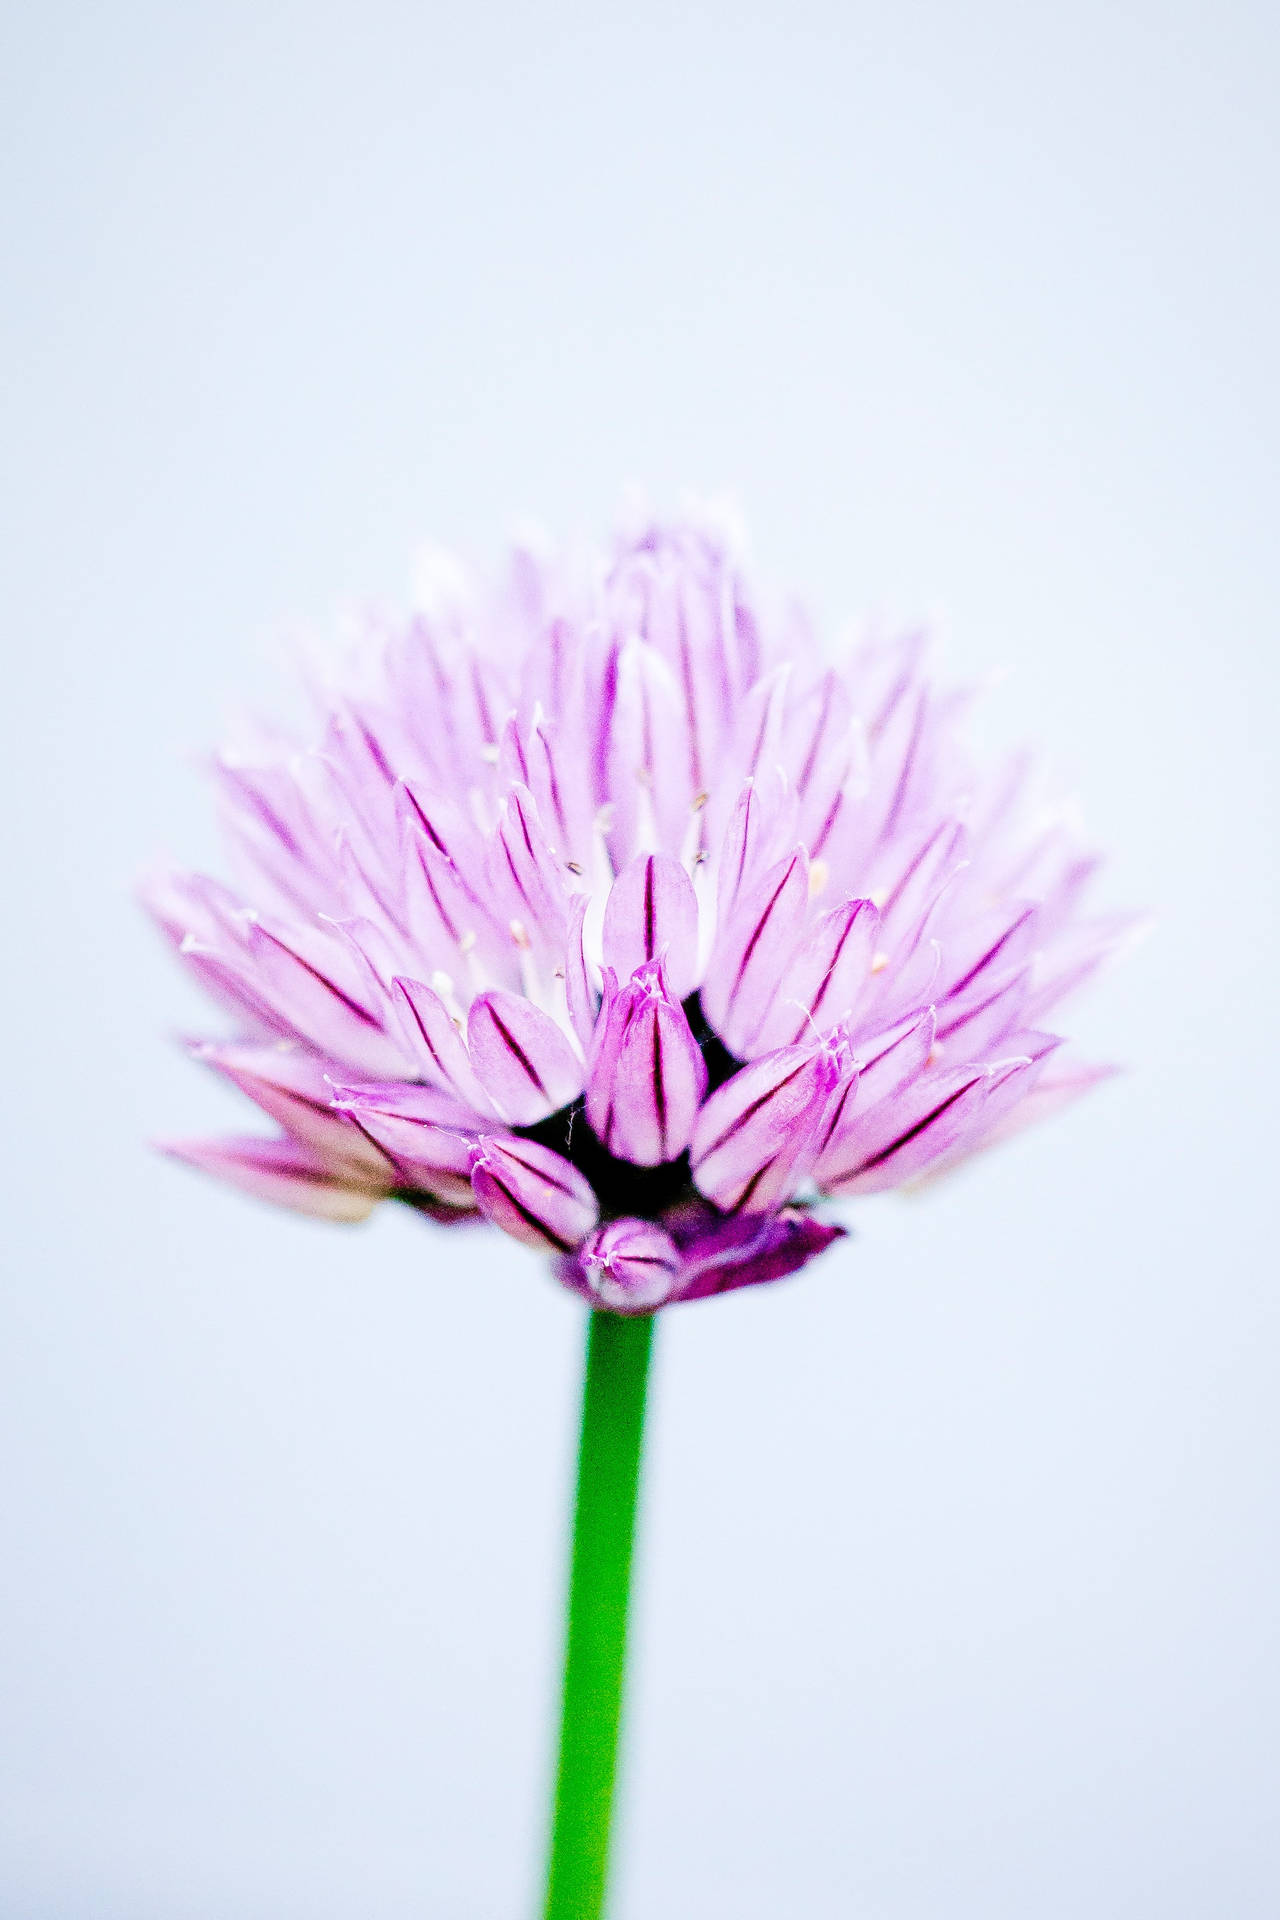 Chives Flower Android